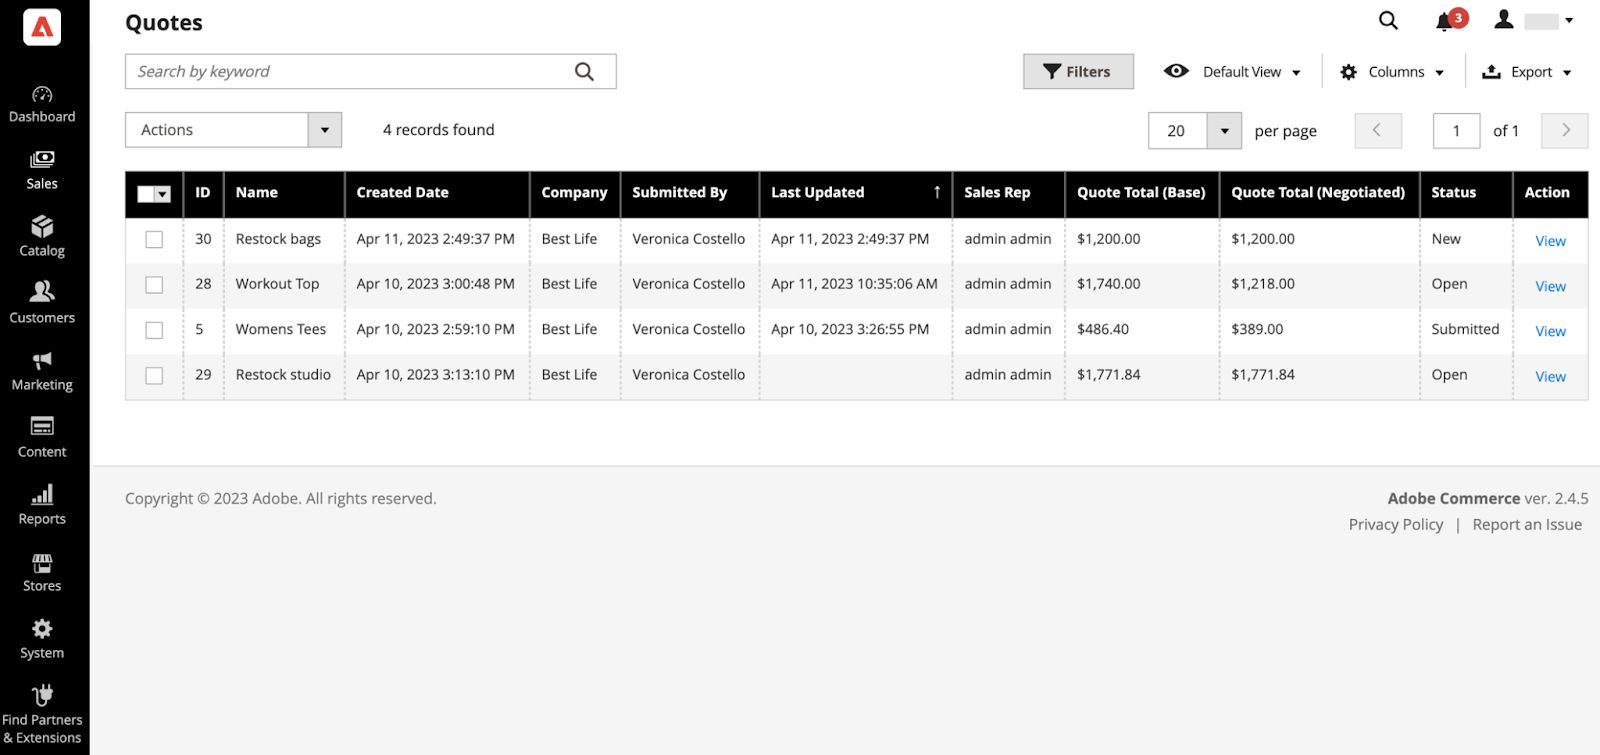 This dashboard page shows quote history and records in Magento B2B.